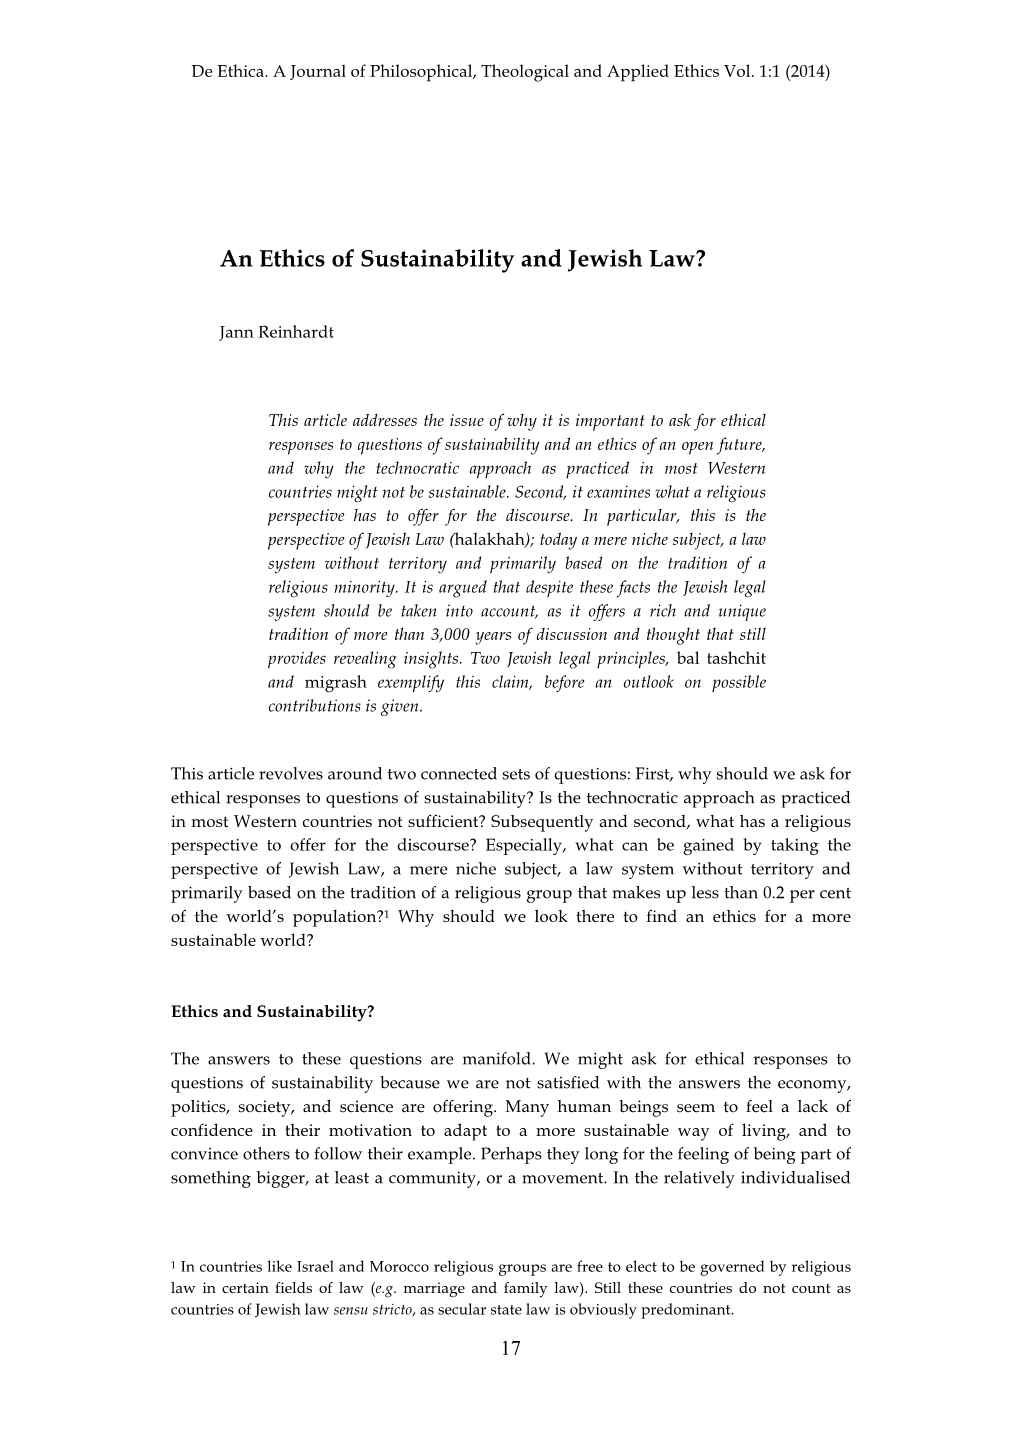 An Ethics of Sustainability and Jewish Law?